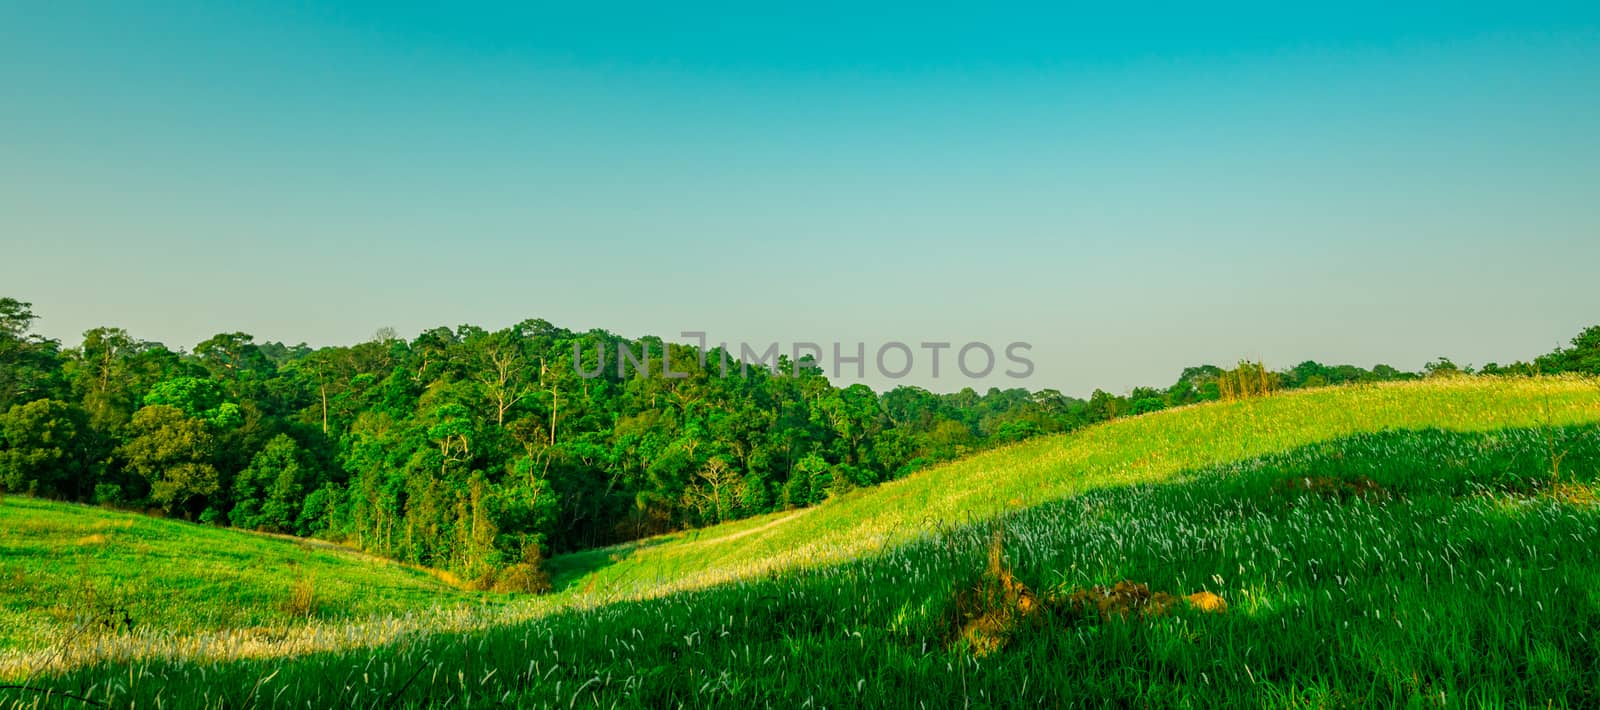 Beautiful rural landscape of green grass field with white flowers on clear blue sky background in the morning on sunshine day. Forest behind the hill. Planet earth concept. Nature composition by Fahroni